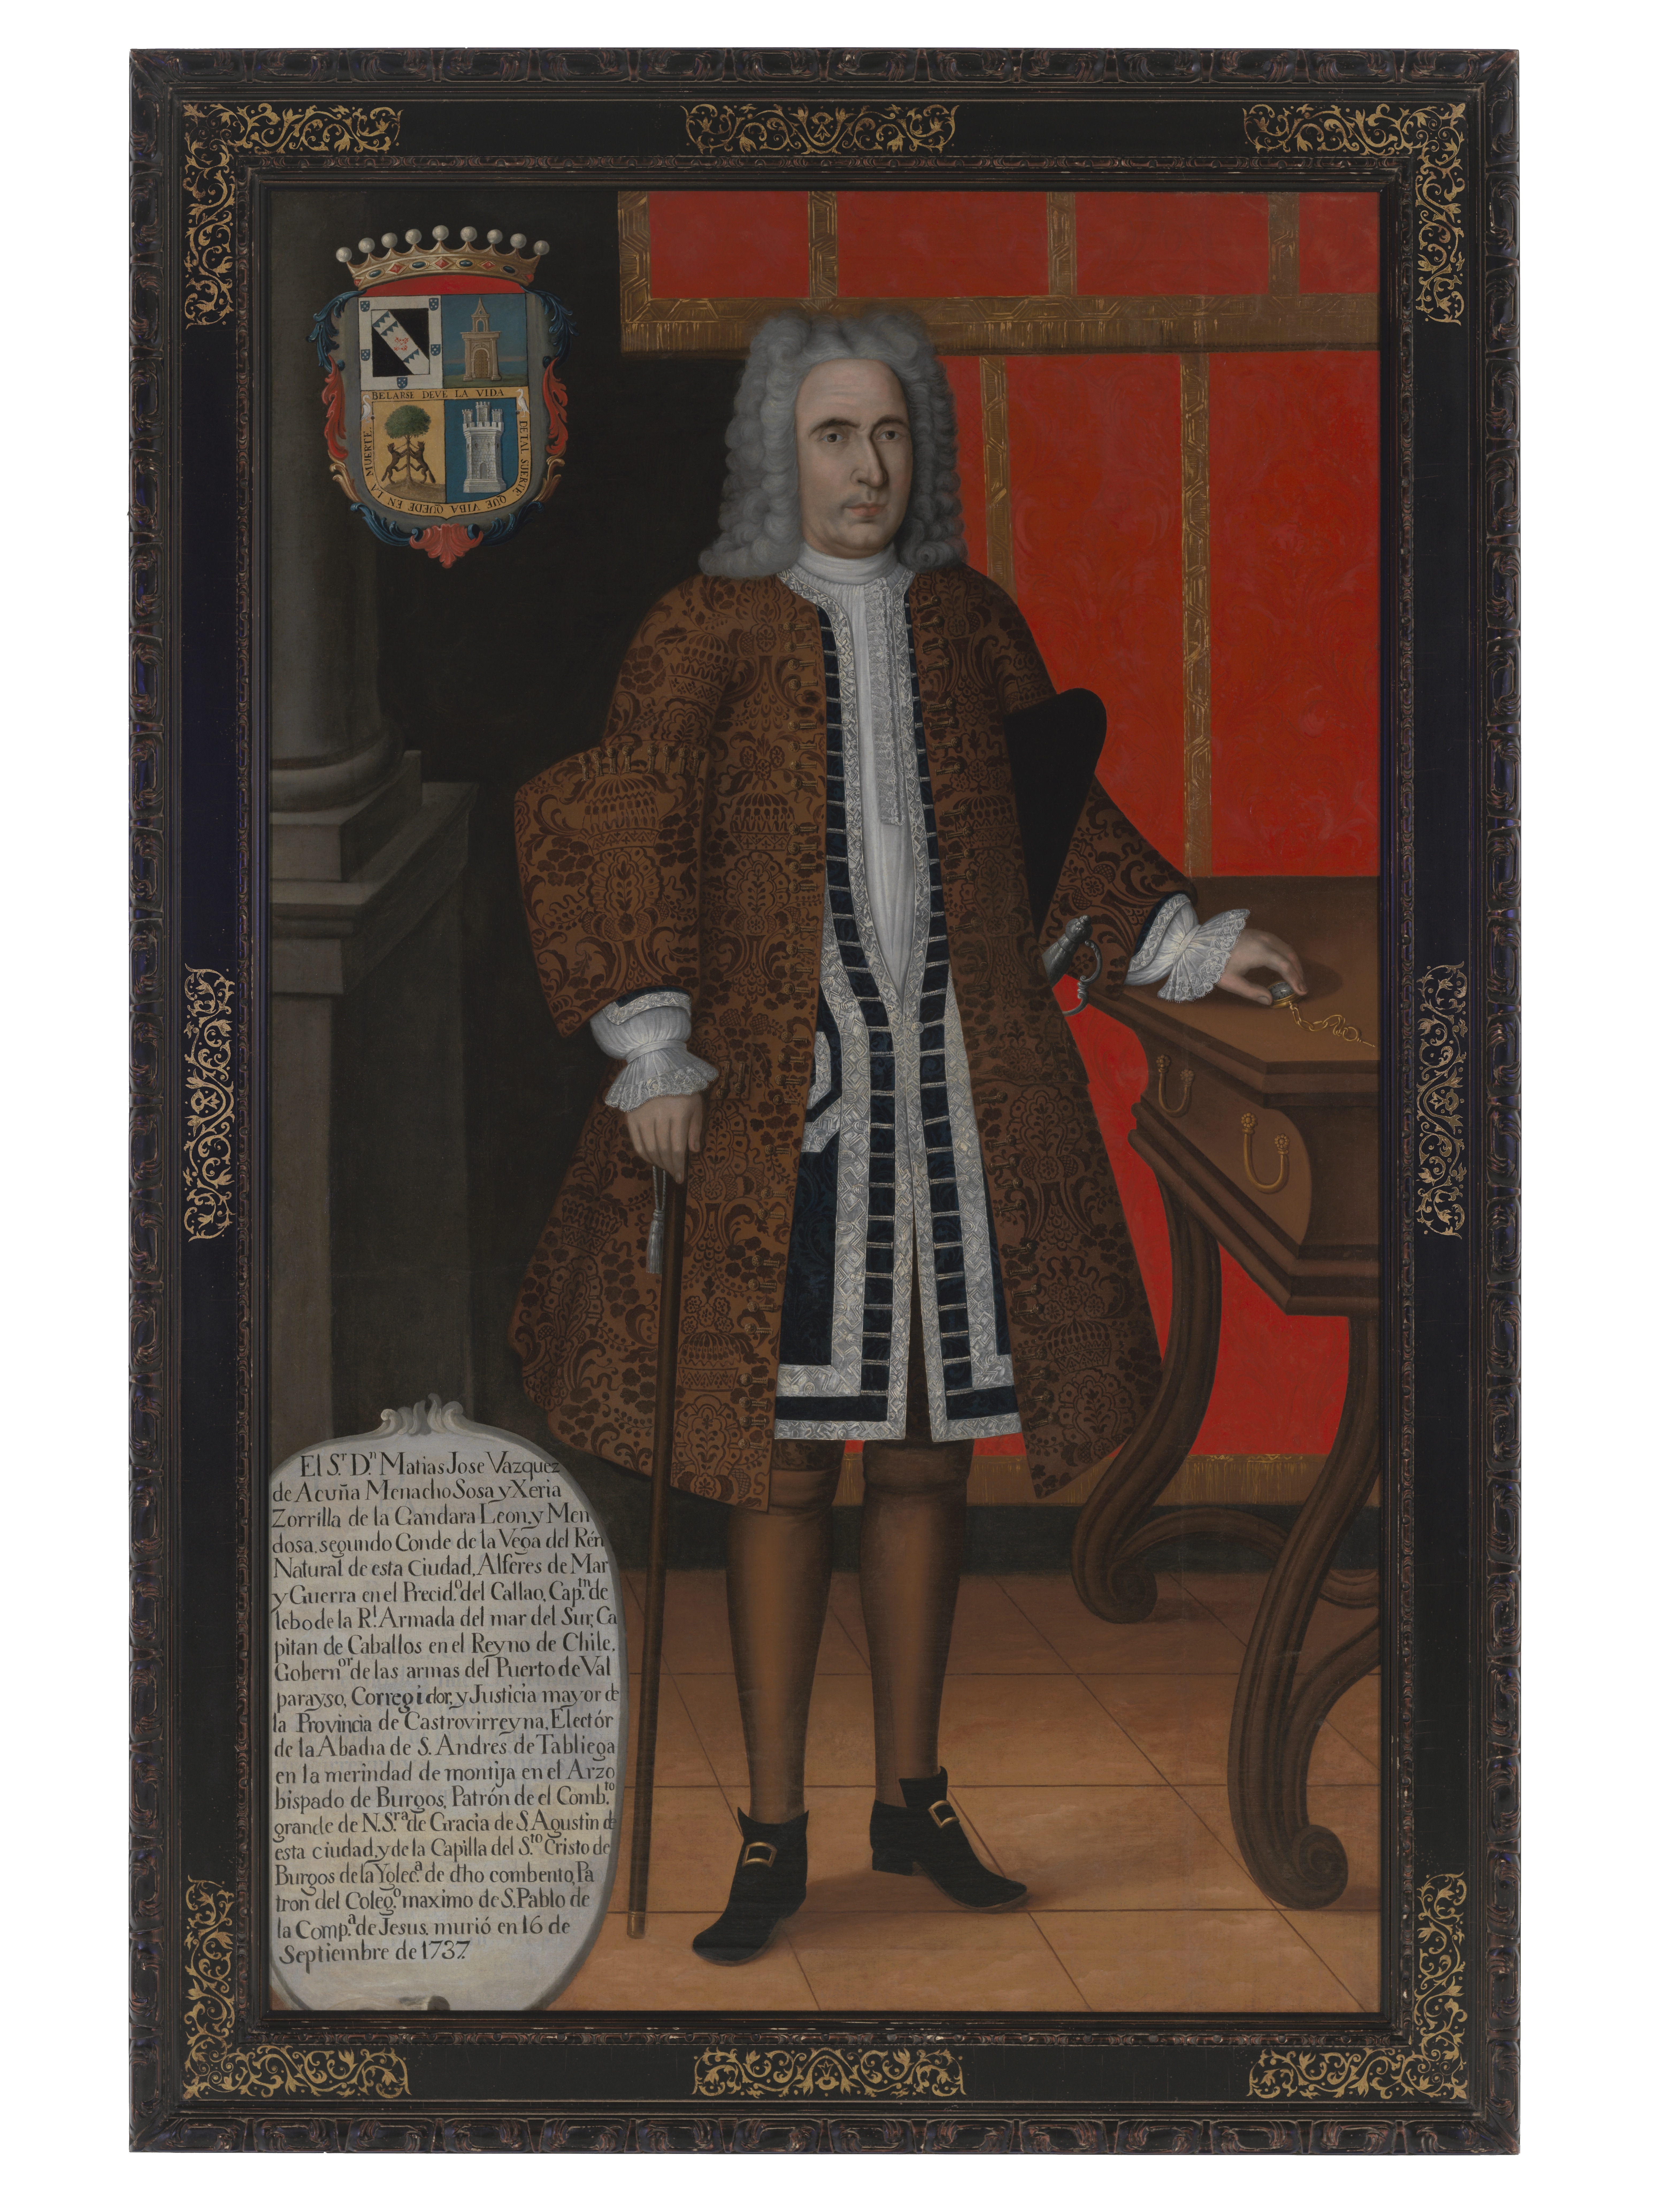 A painting depicting a man in an opulent set of clothes standing at a table with a red drape behind him. His coat of arms is in the top left corner while a cartouche of his biography is at the bottom left.